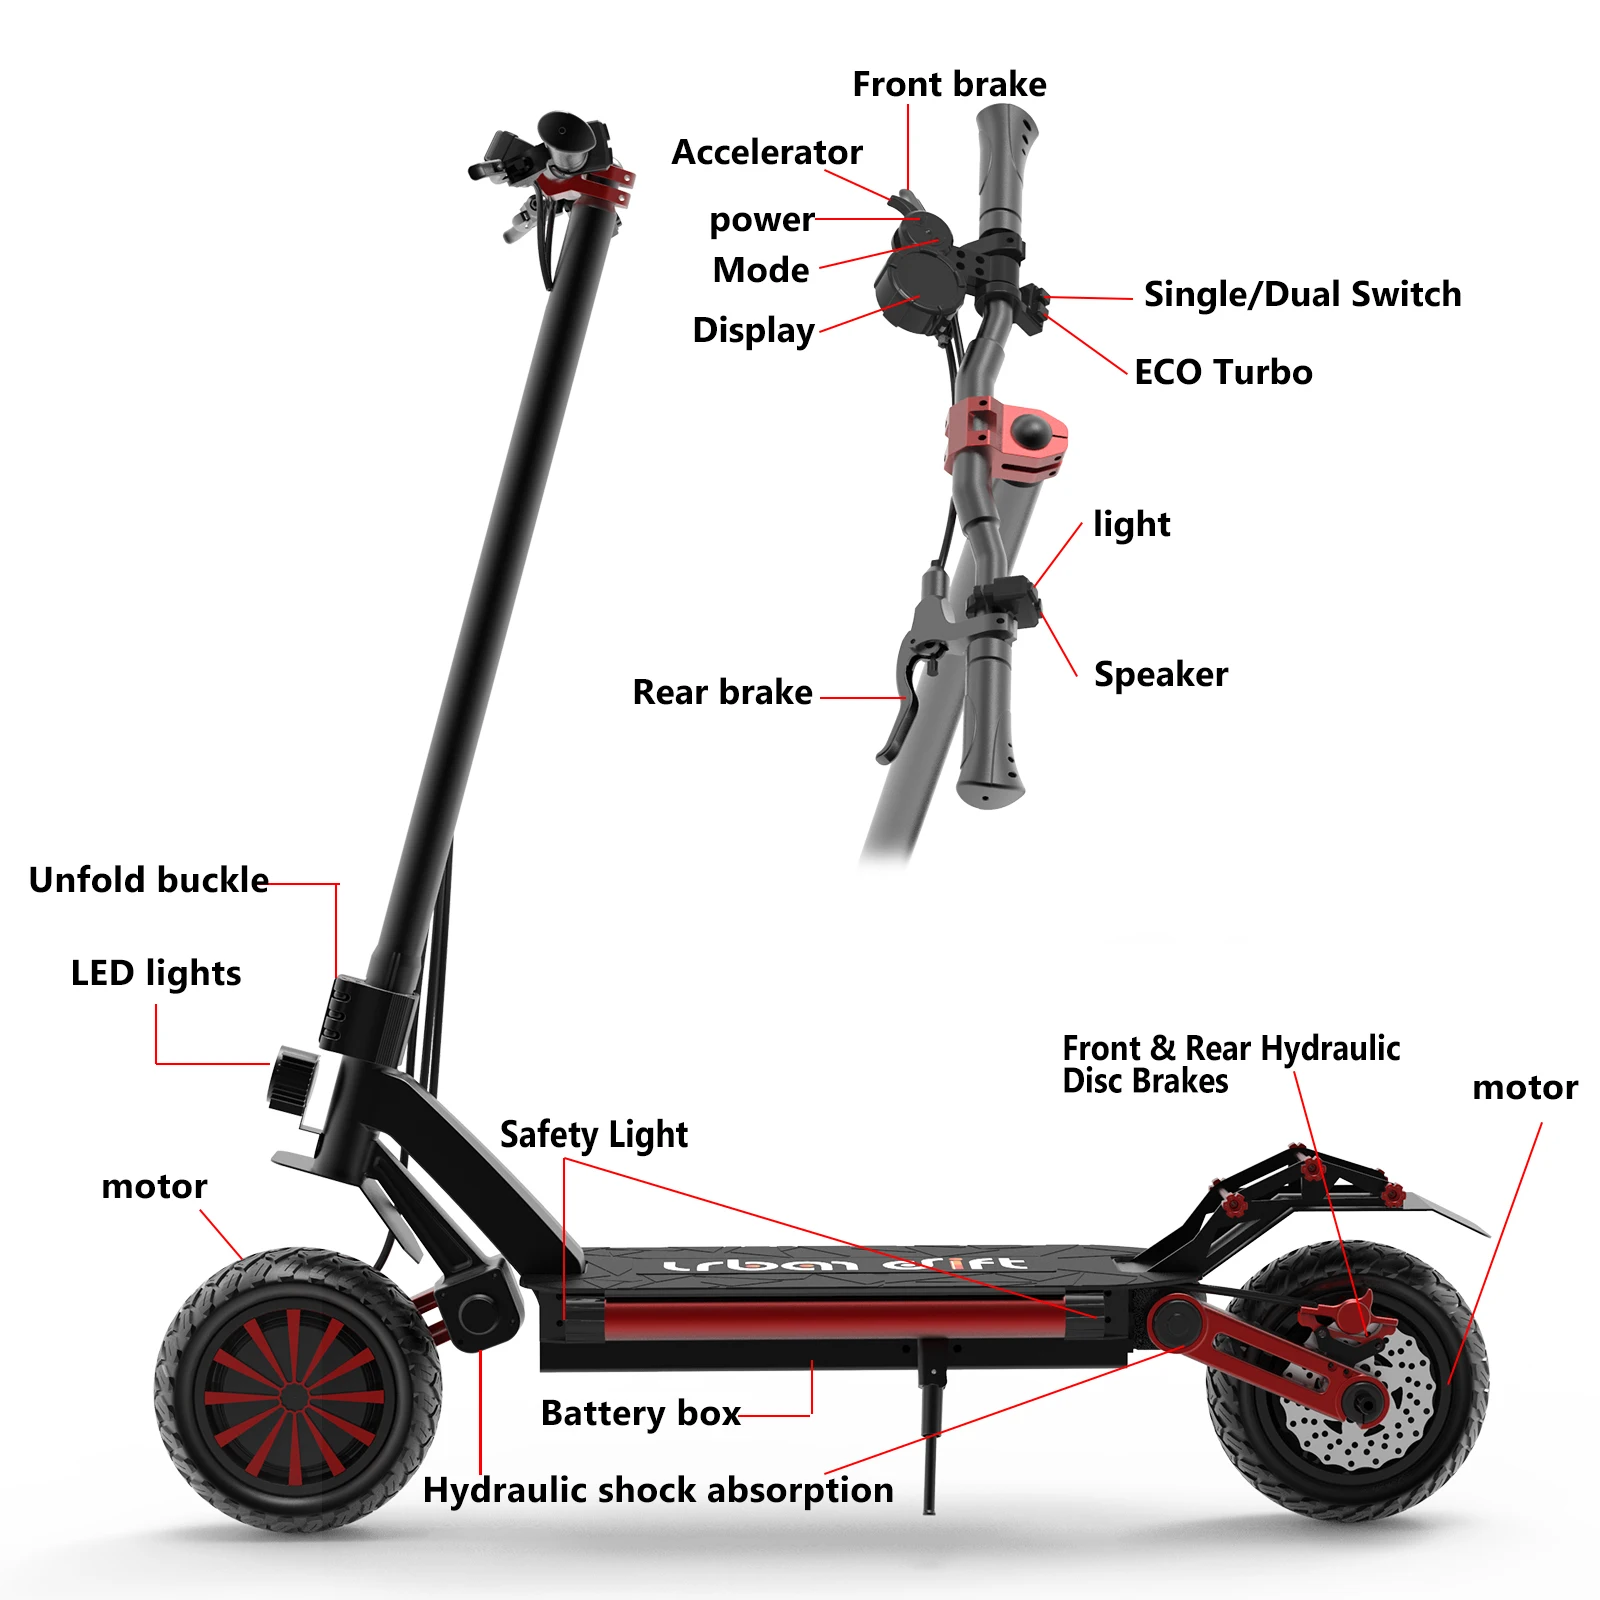 

hot sale cheap USA warehouse stock Free shipping electric scooter 2000w dual motor 52V 20Ah offroad Big Wheel electric scooters